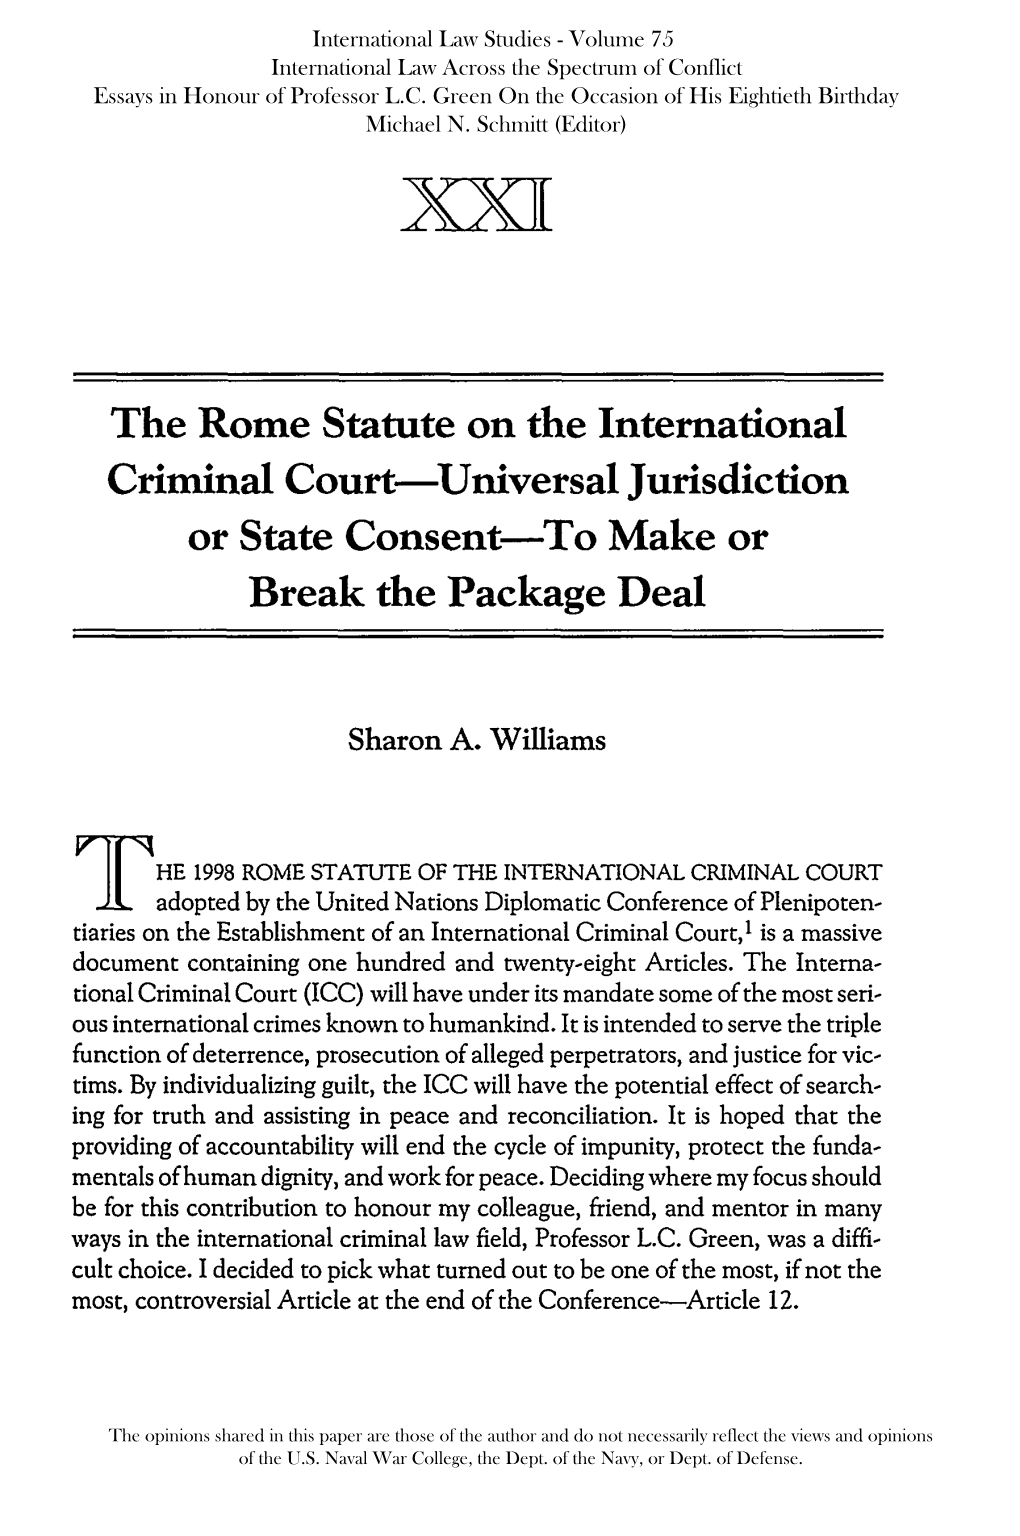 The Rome Statute on the International Criminal Court-Universal Jurisdiction Or State Consent-To Make Or Break the Package Deal